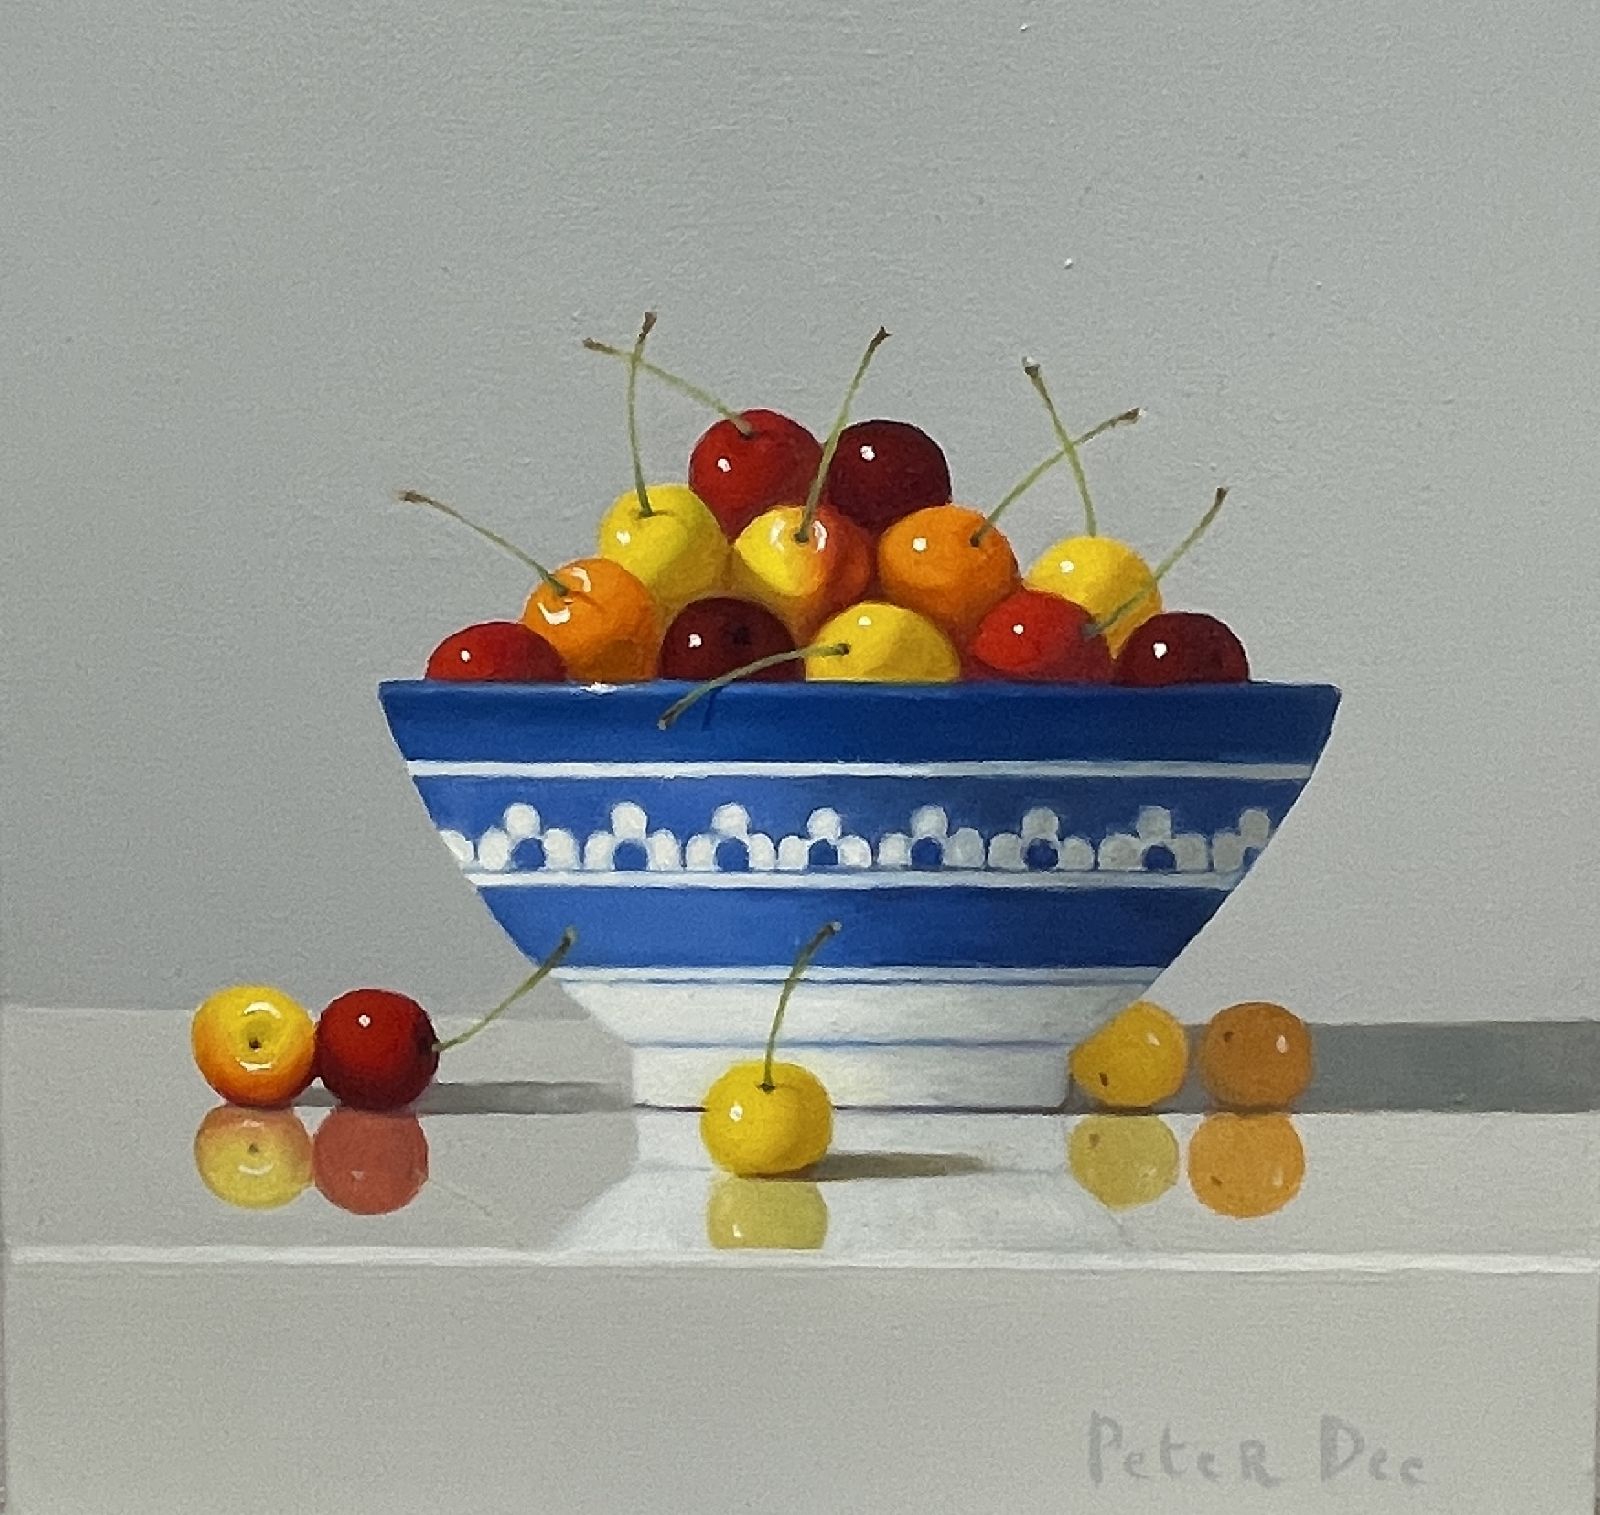 Blue and White Bowl with Rainier Cherries by Peter Dee